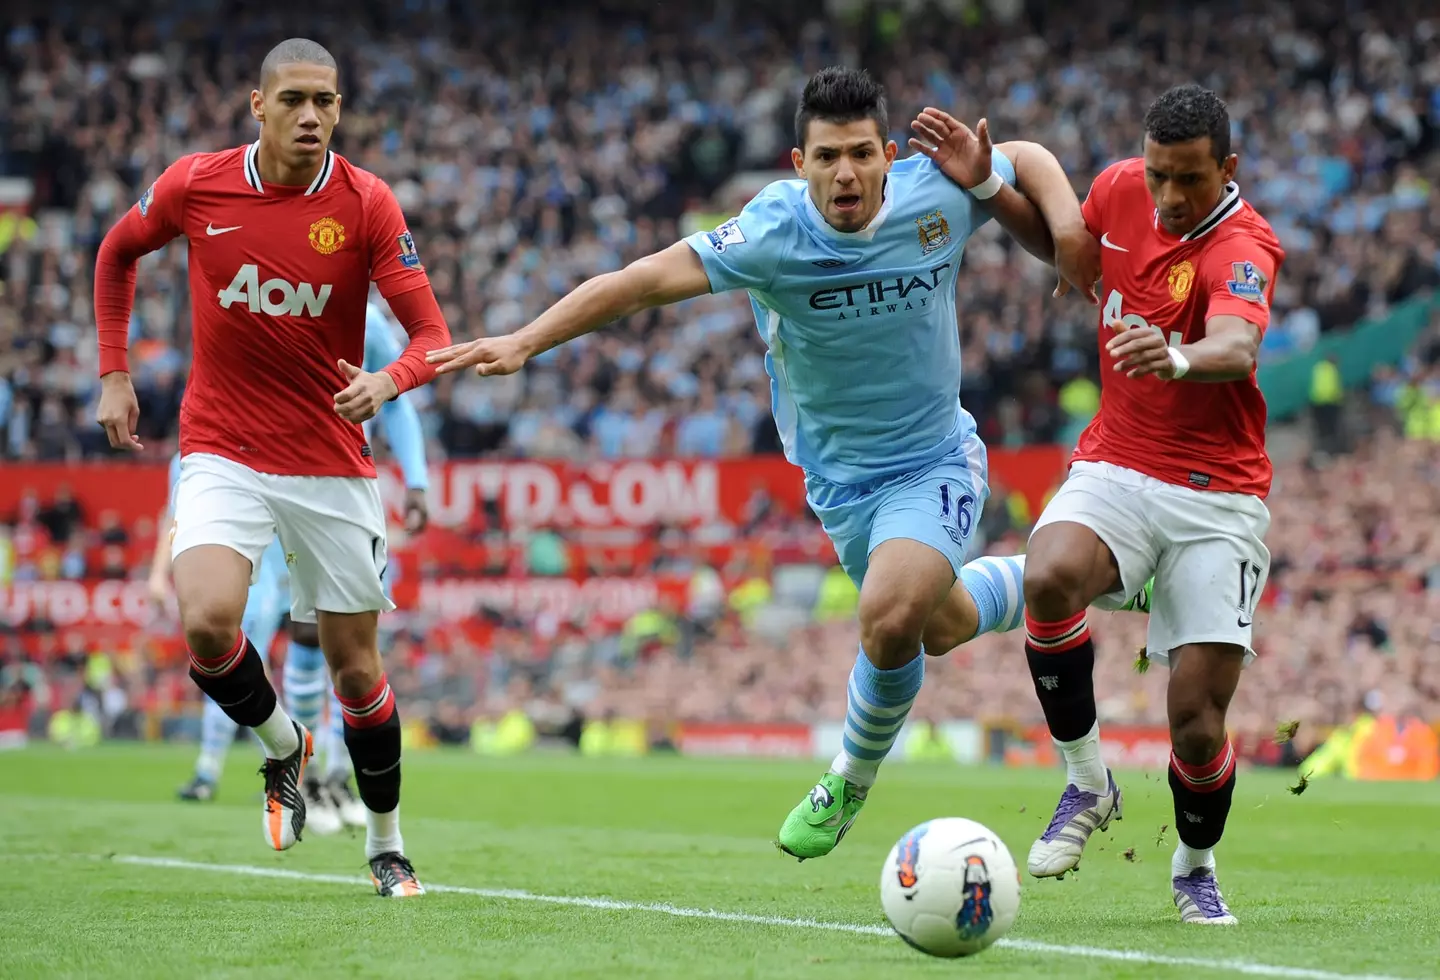 Sergio Aguero and Nani battle for the ball during a Premier League match. Image: Getty